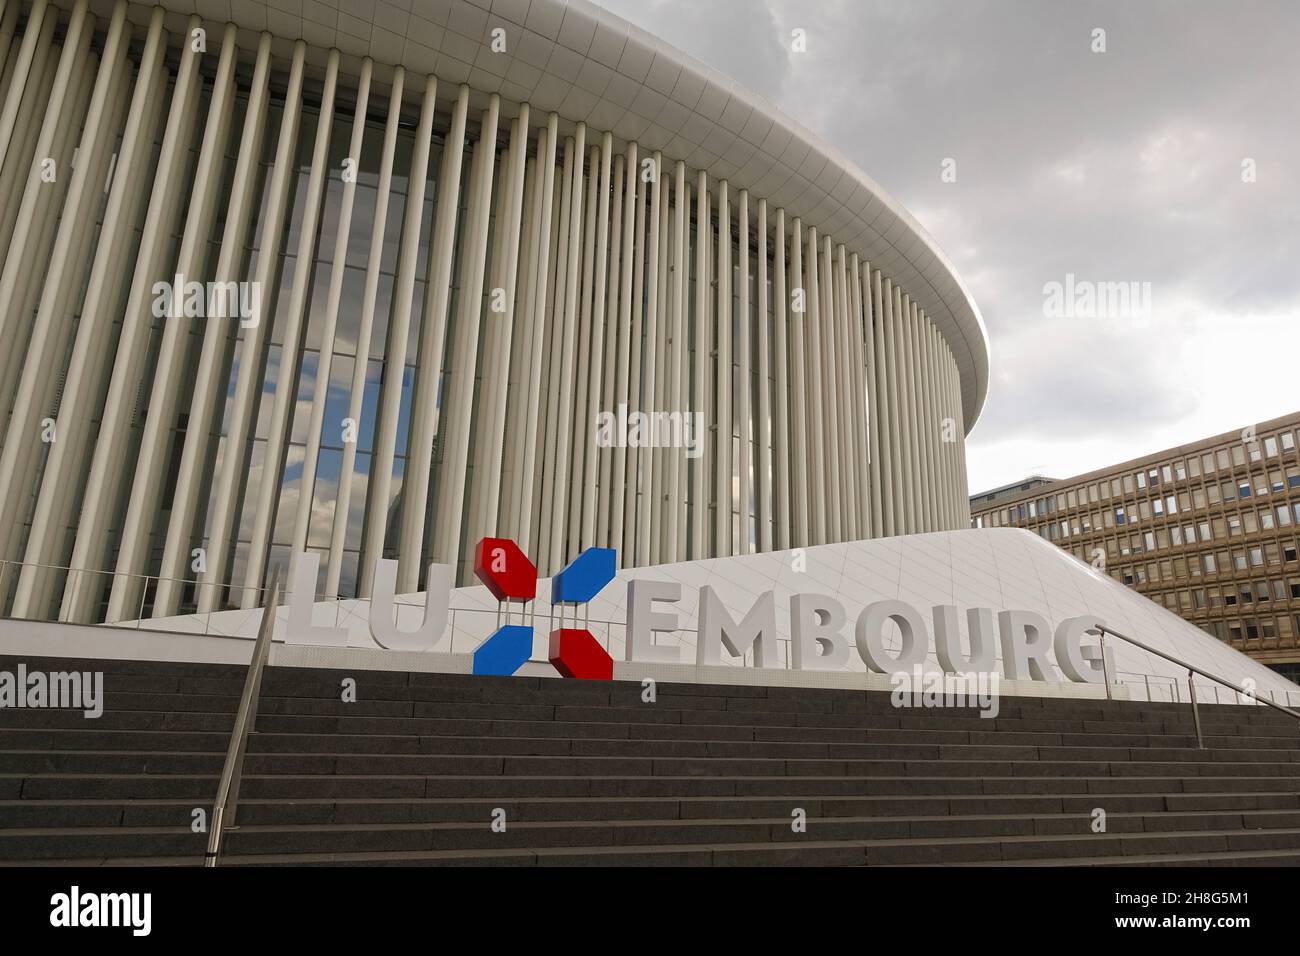 Luxembourg City, Luxembourg – September 2, 2020: The philharmonic hall in Luxembourg City, created by architect Christian de Portzamparc. The spectacu Stock Photo